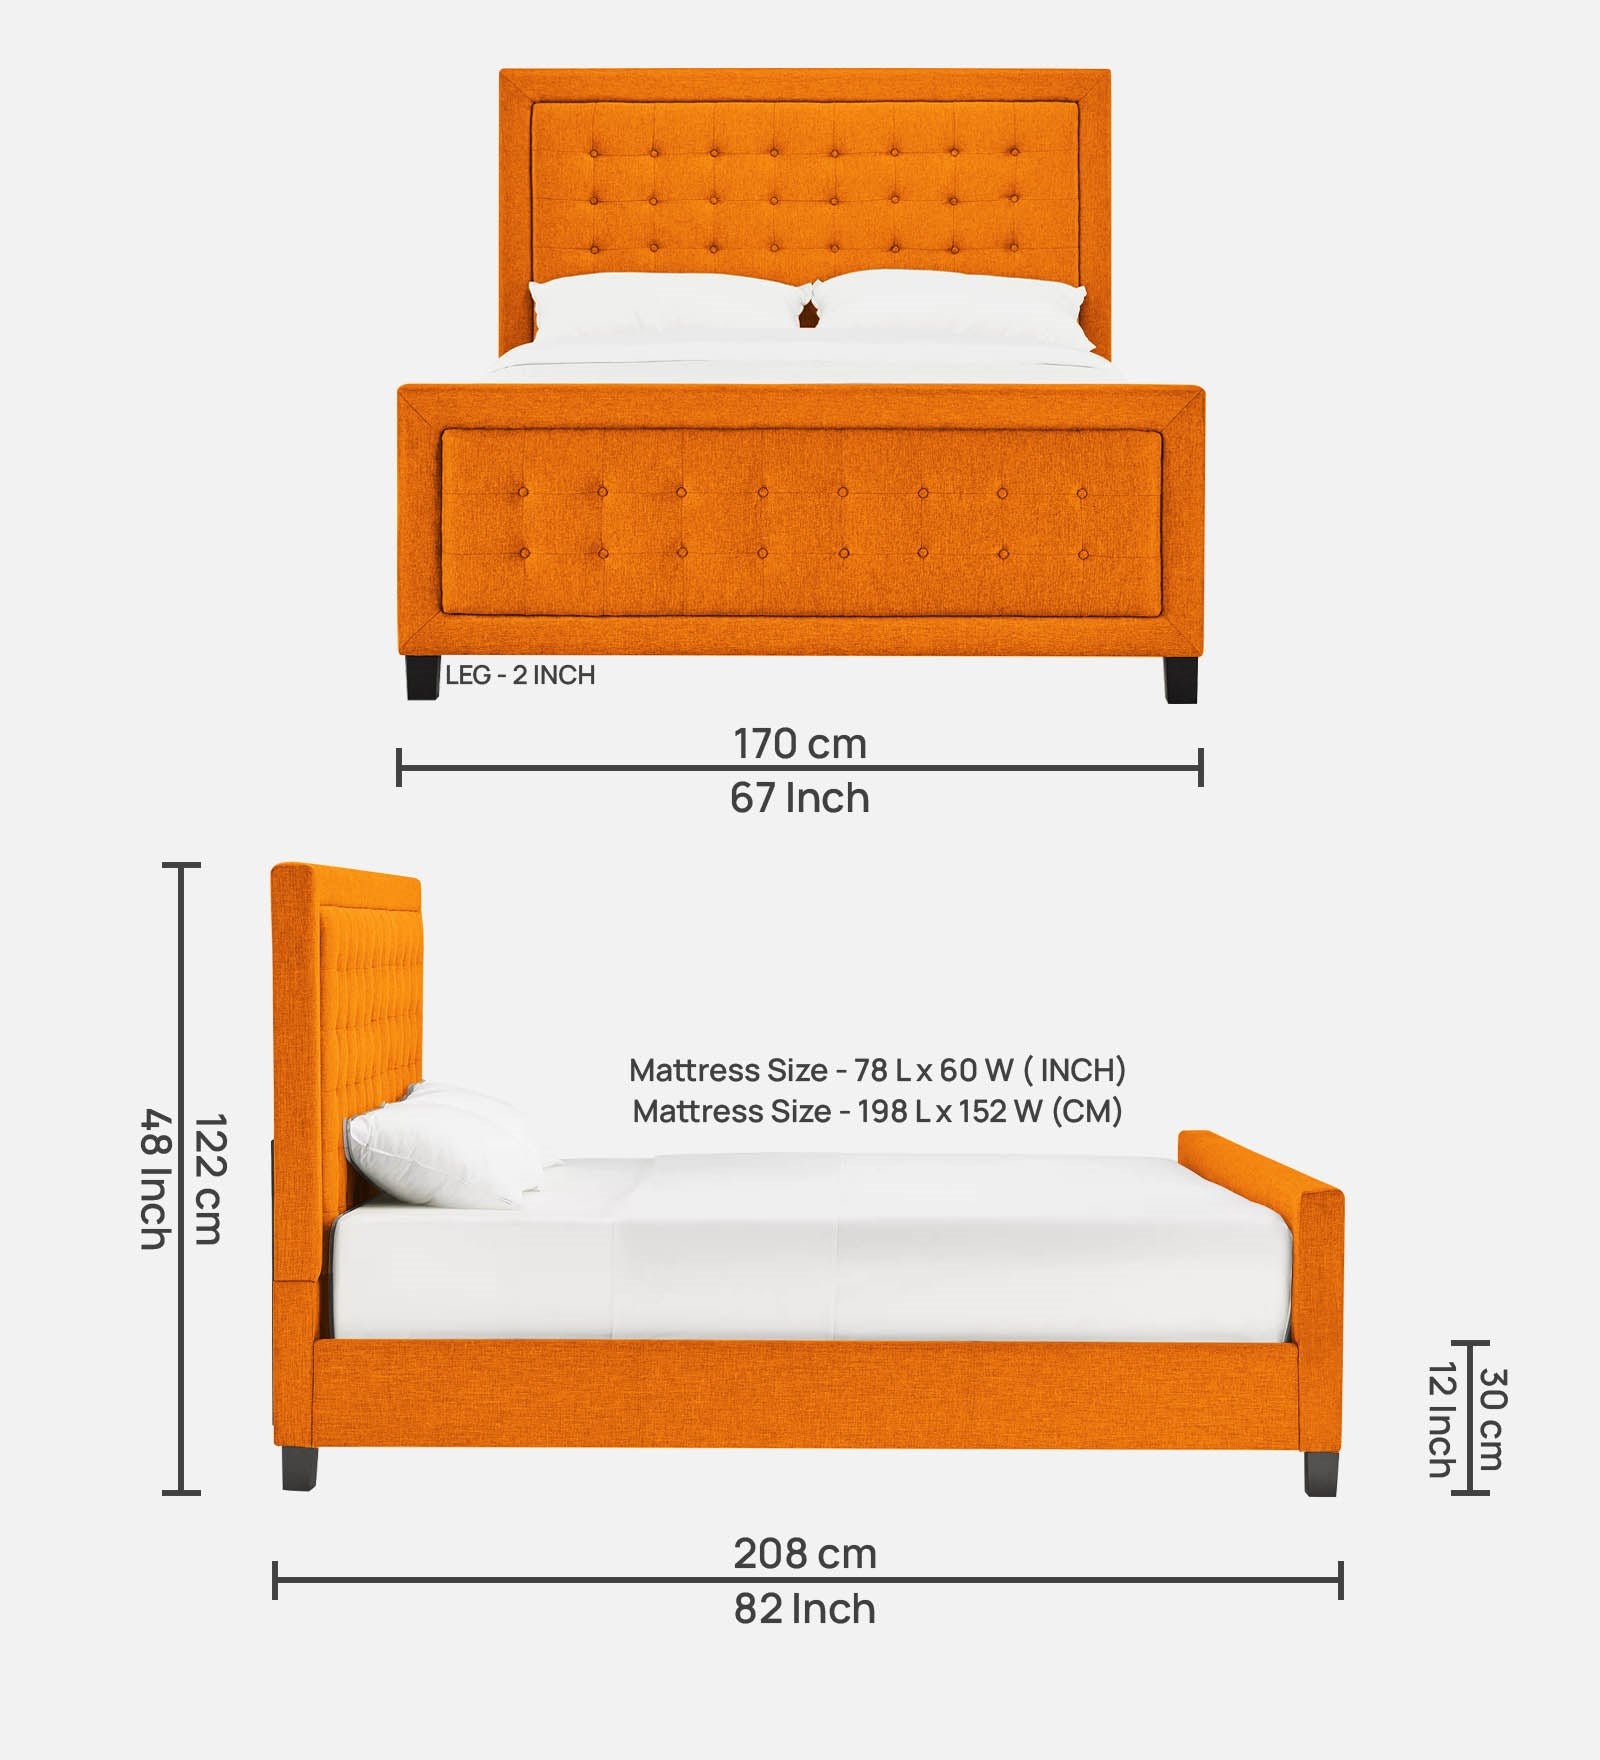 Kaster Fabric Queen Size Bed In Vivid Orange Colour